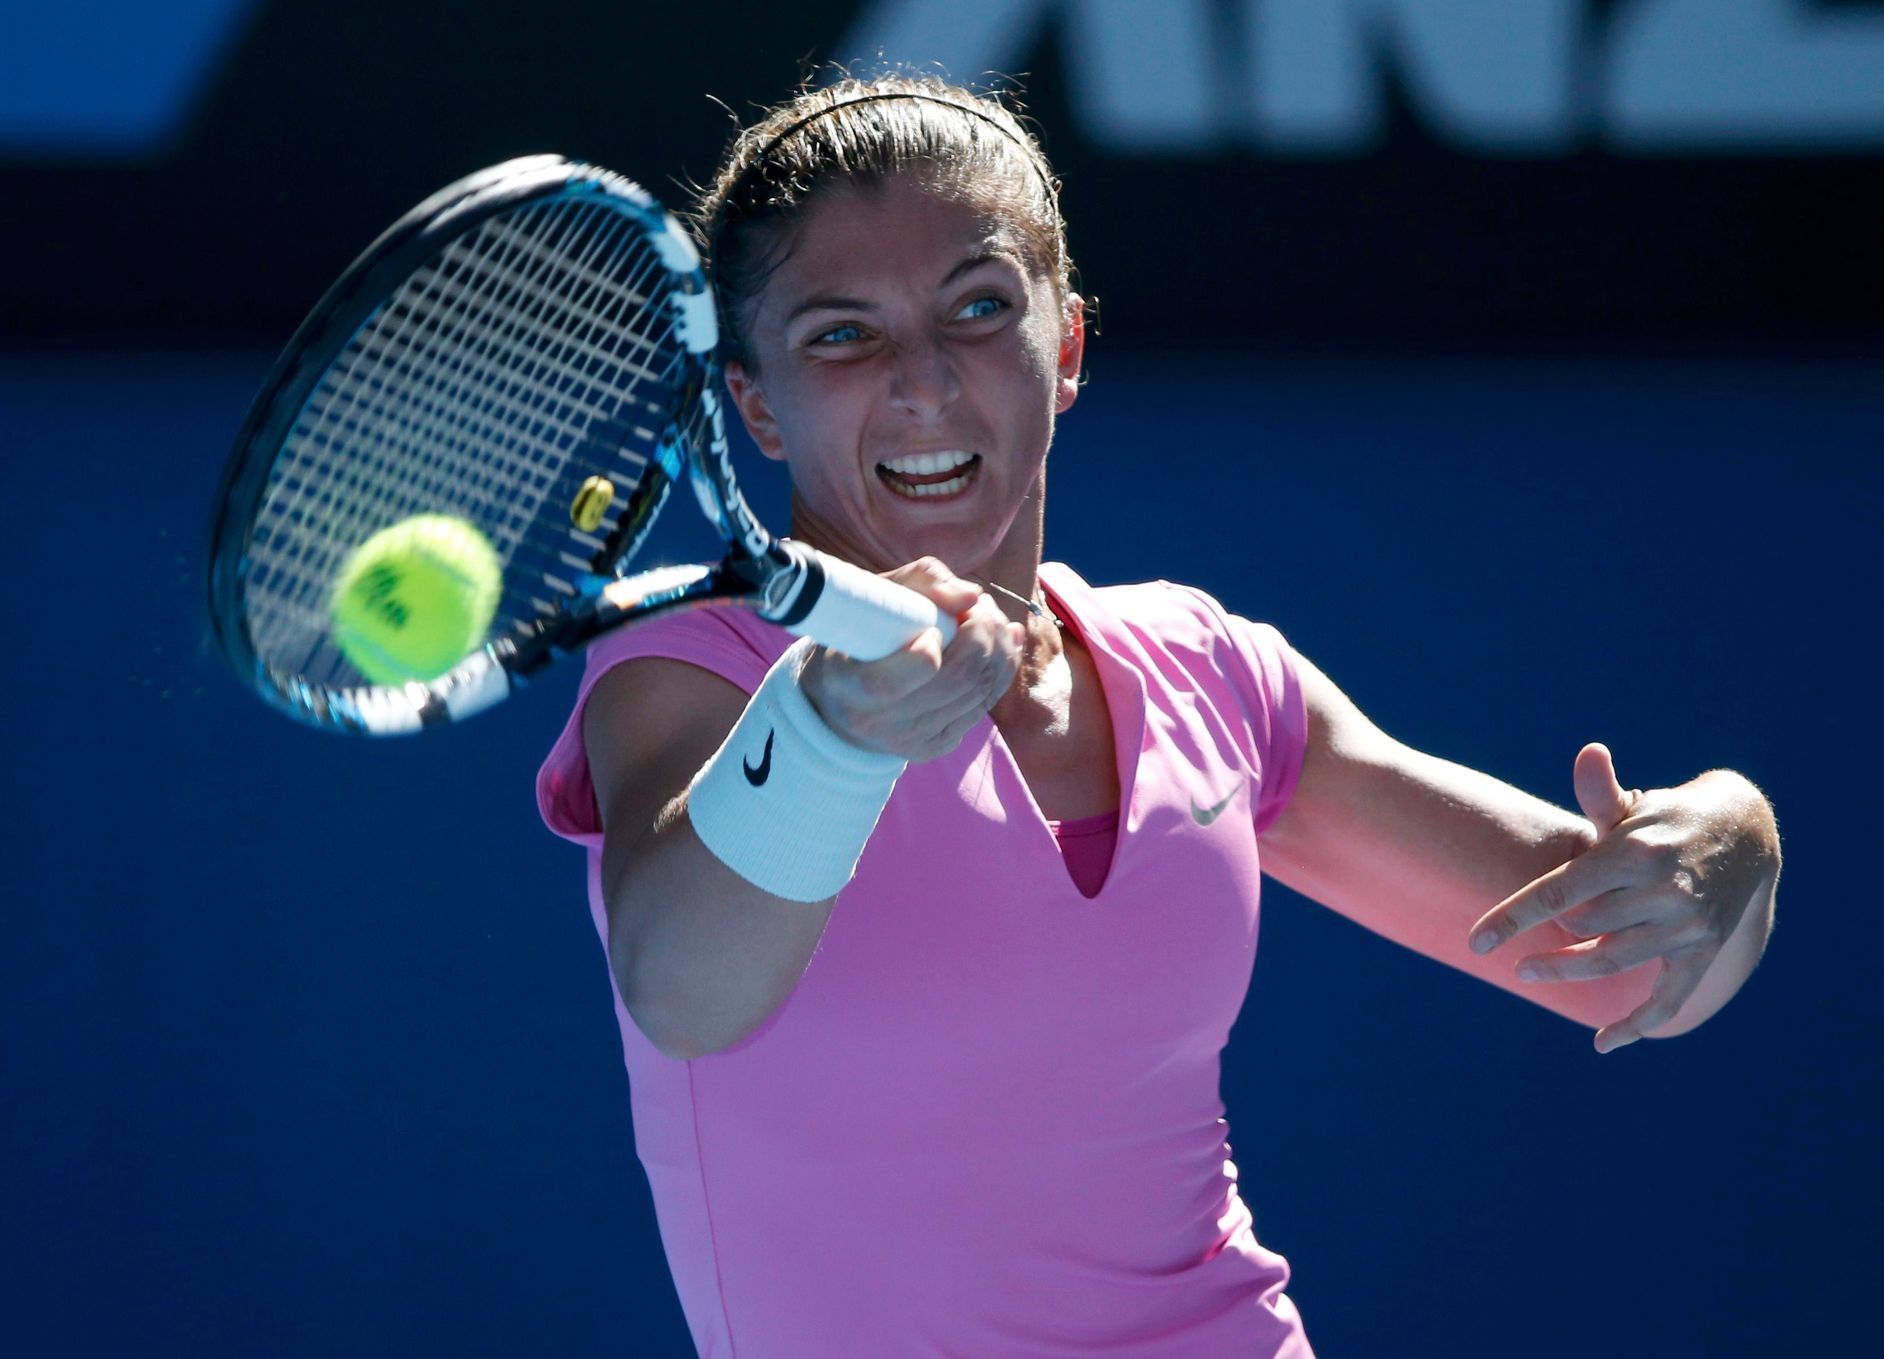 Sara Errani of Italy hits a return to Julia Goerges of Germany at the Australian Open 2014 tennis tournament in Melbourne